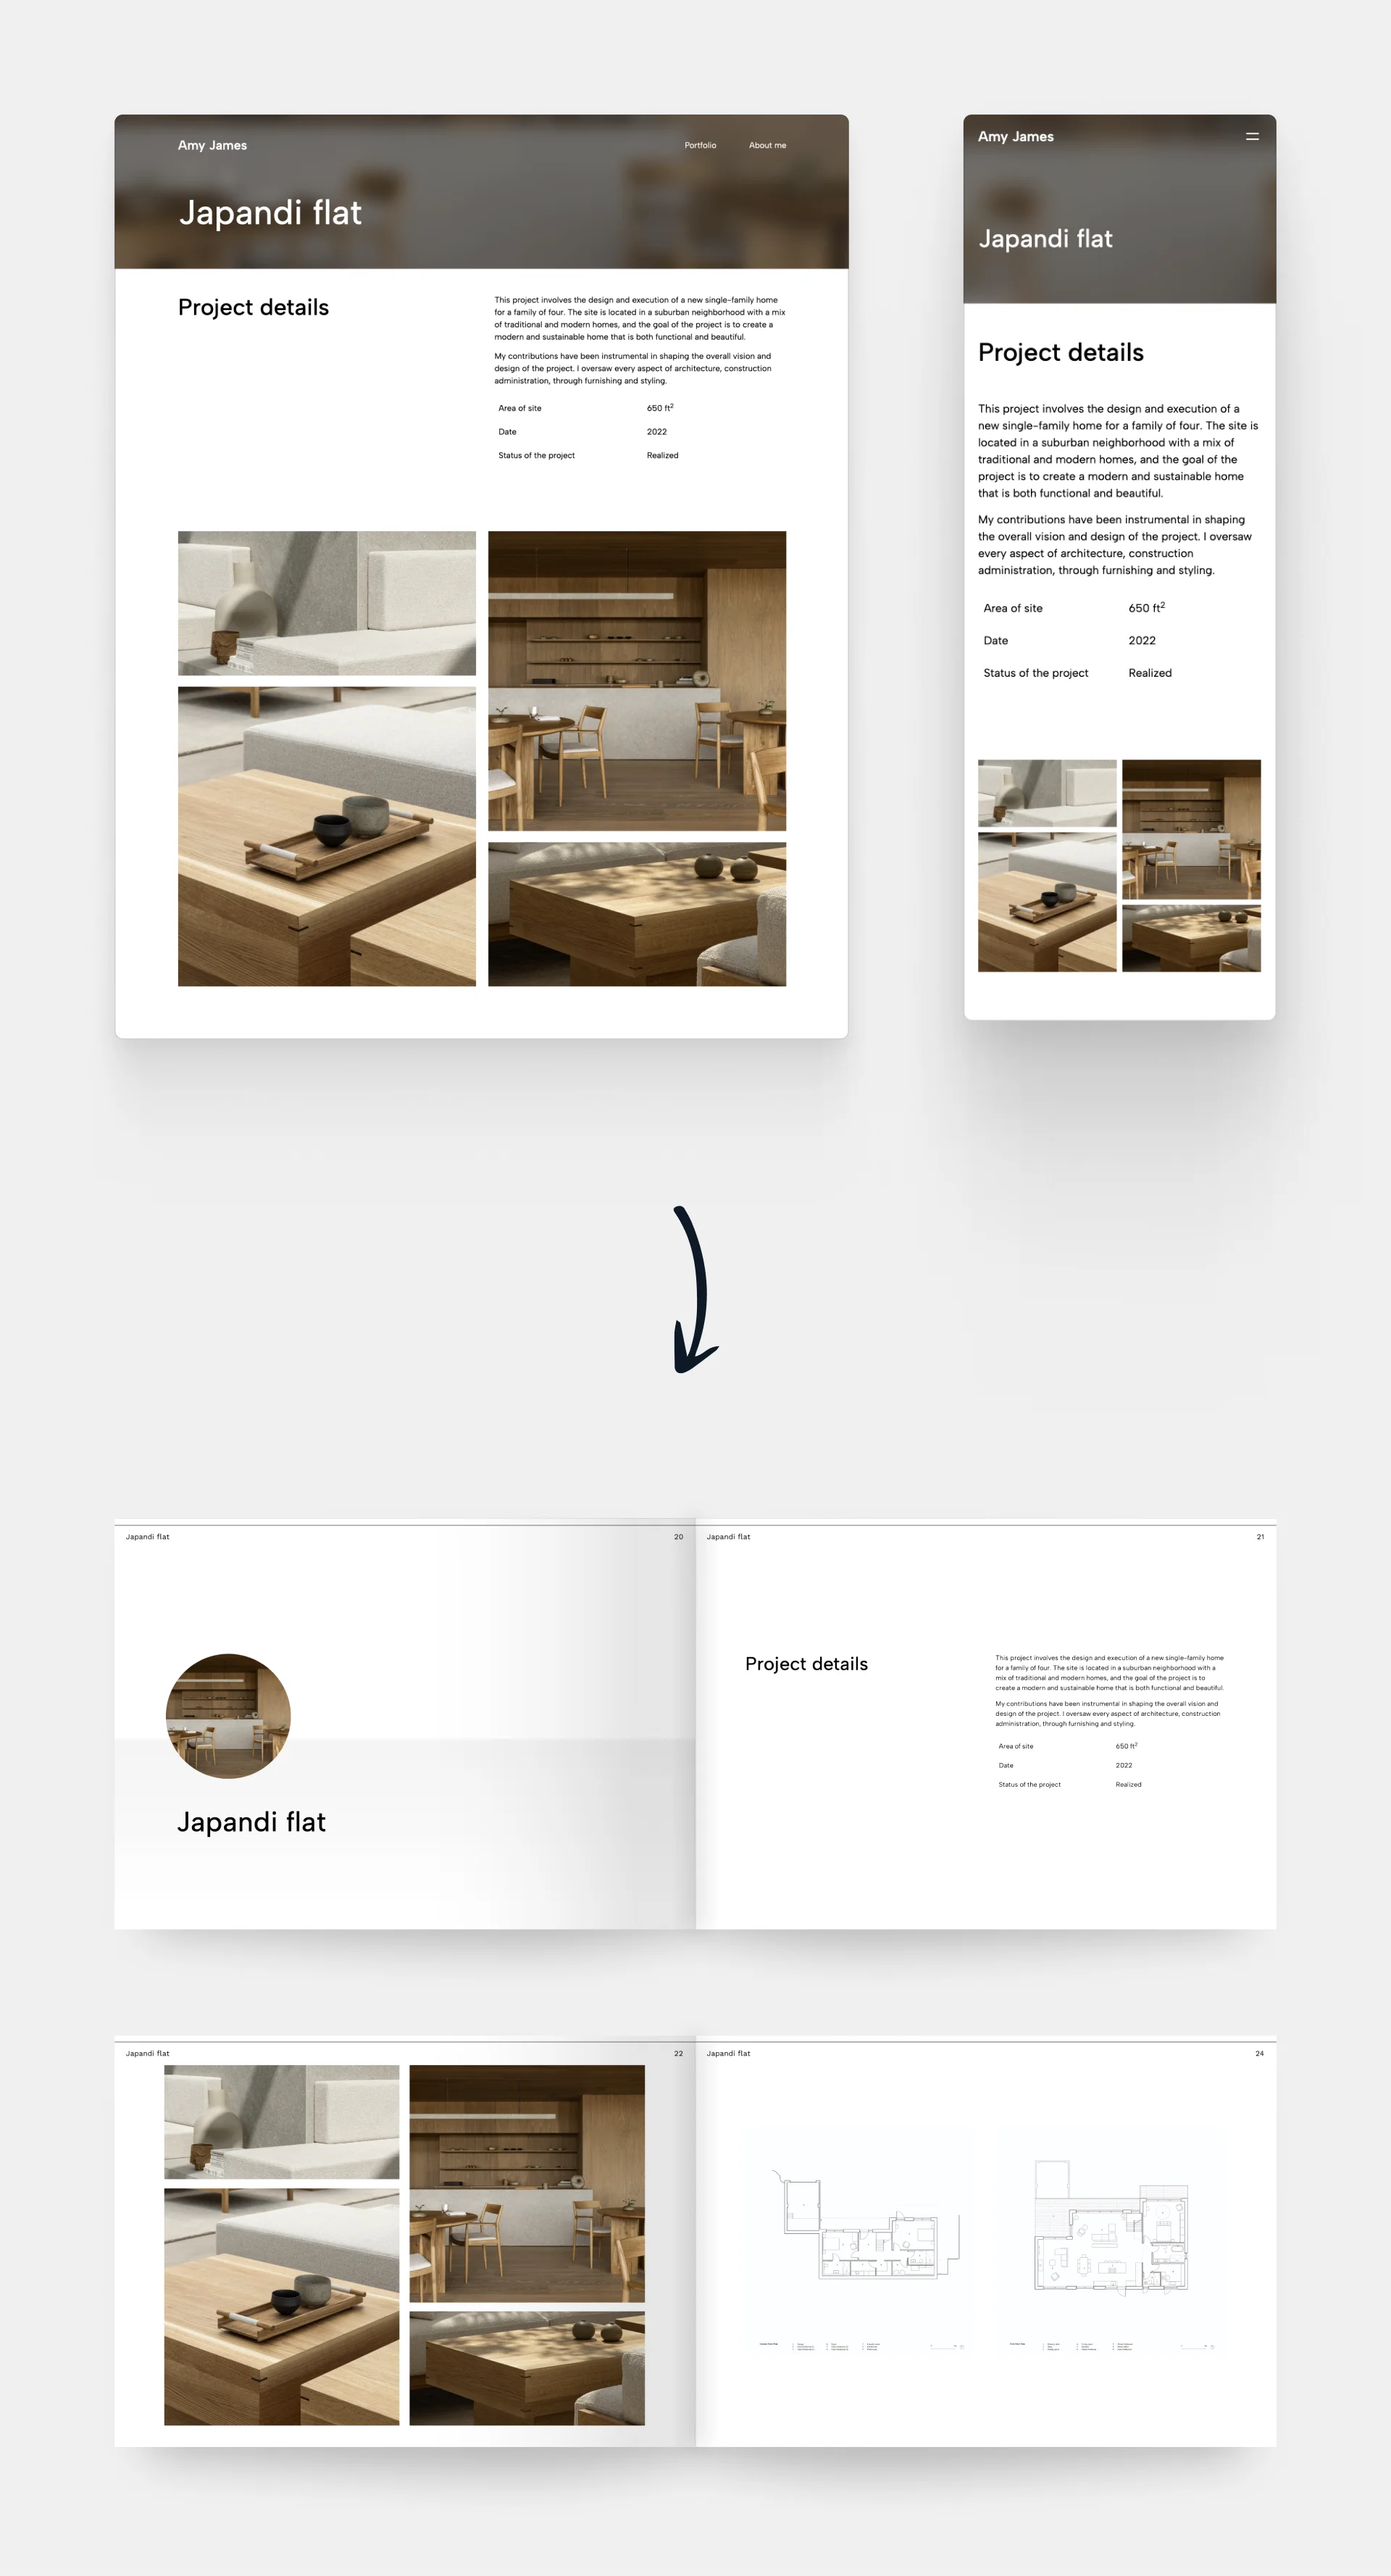 An interior design project example in desktop, mobile, and PDF view.